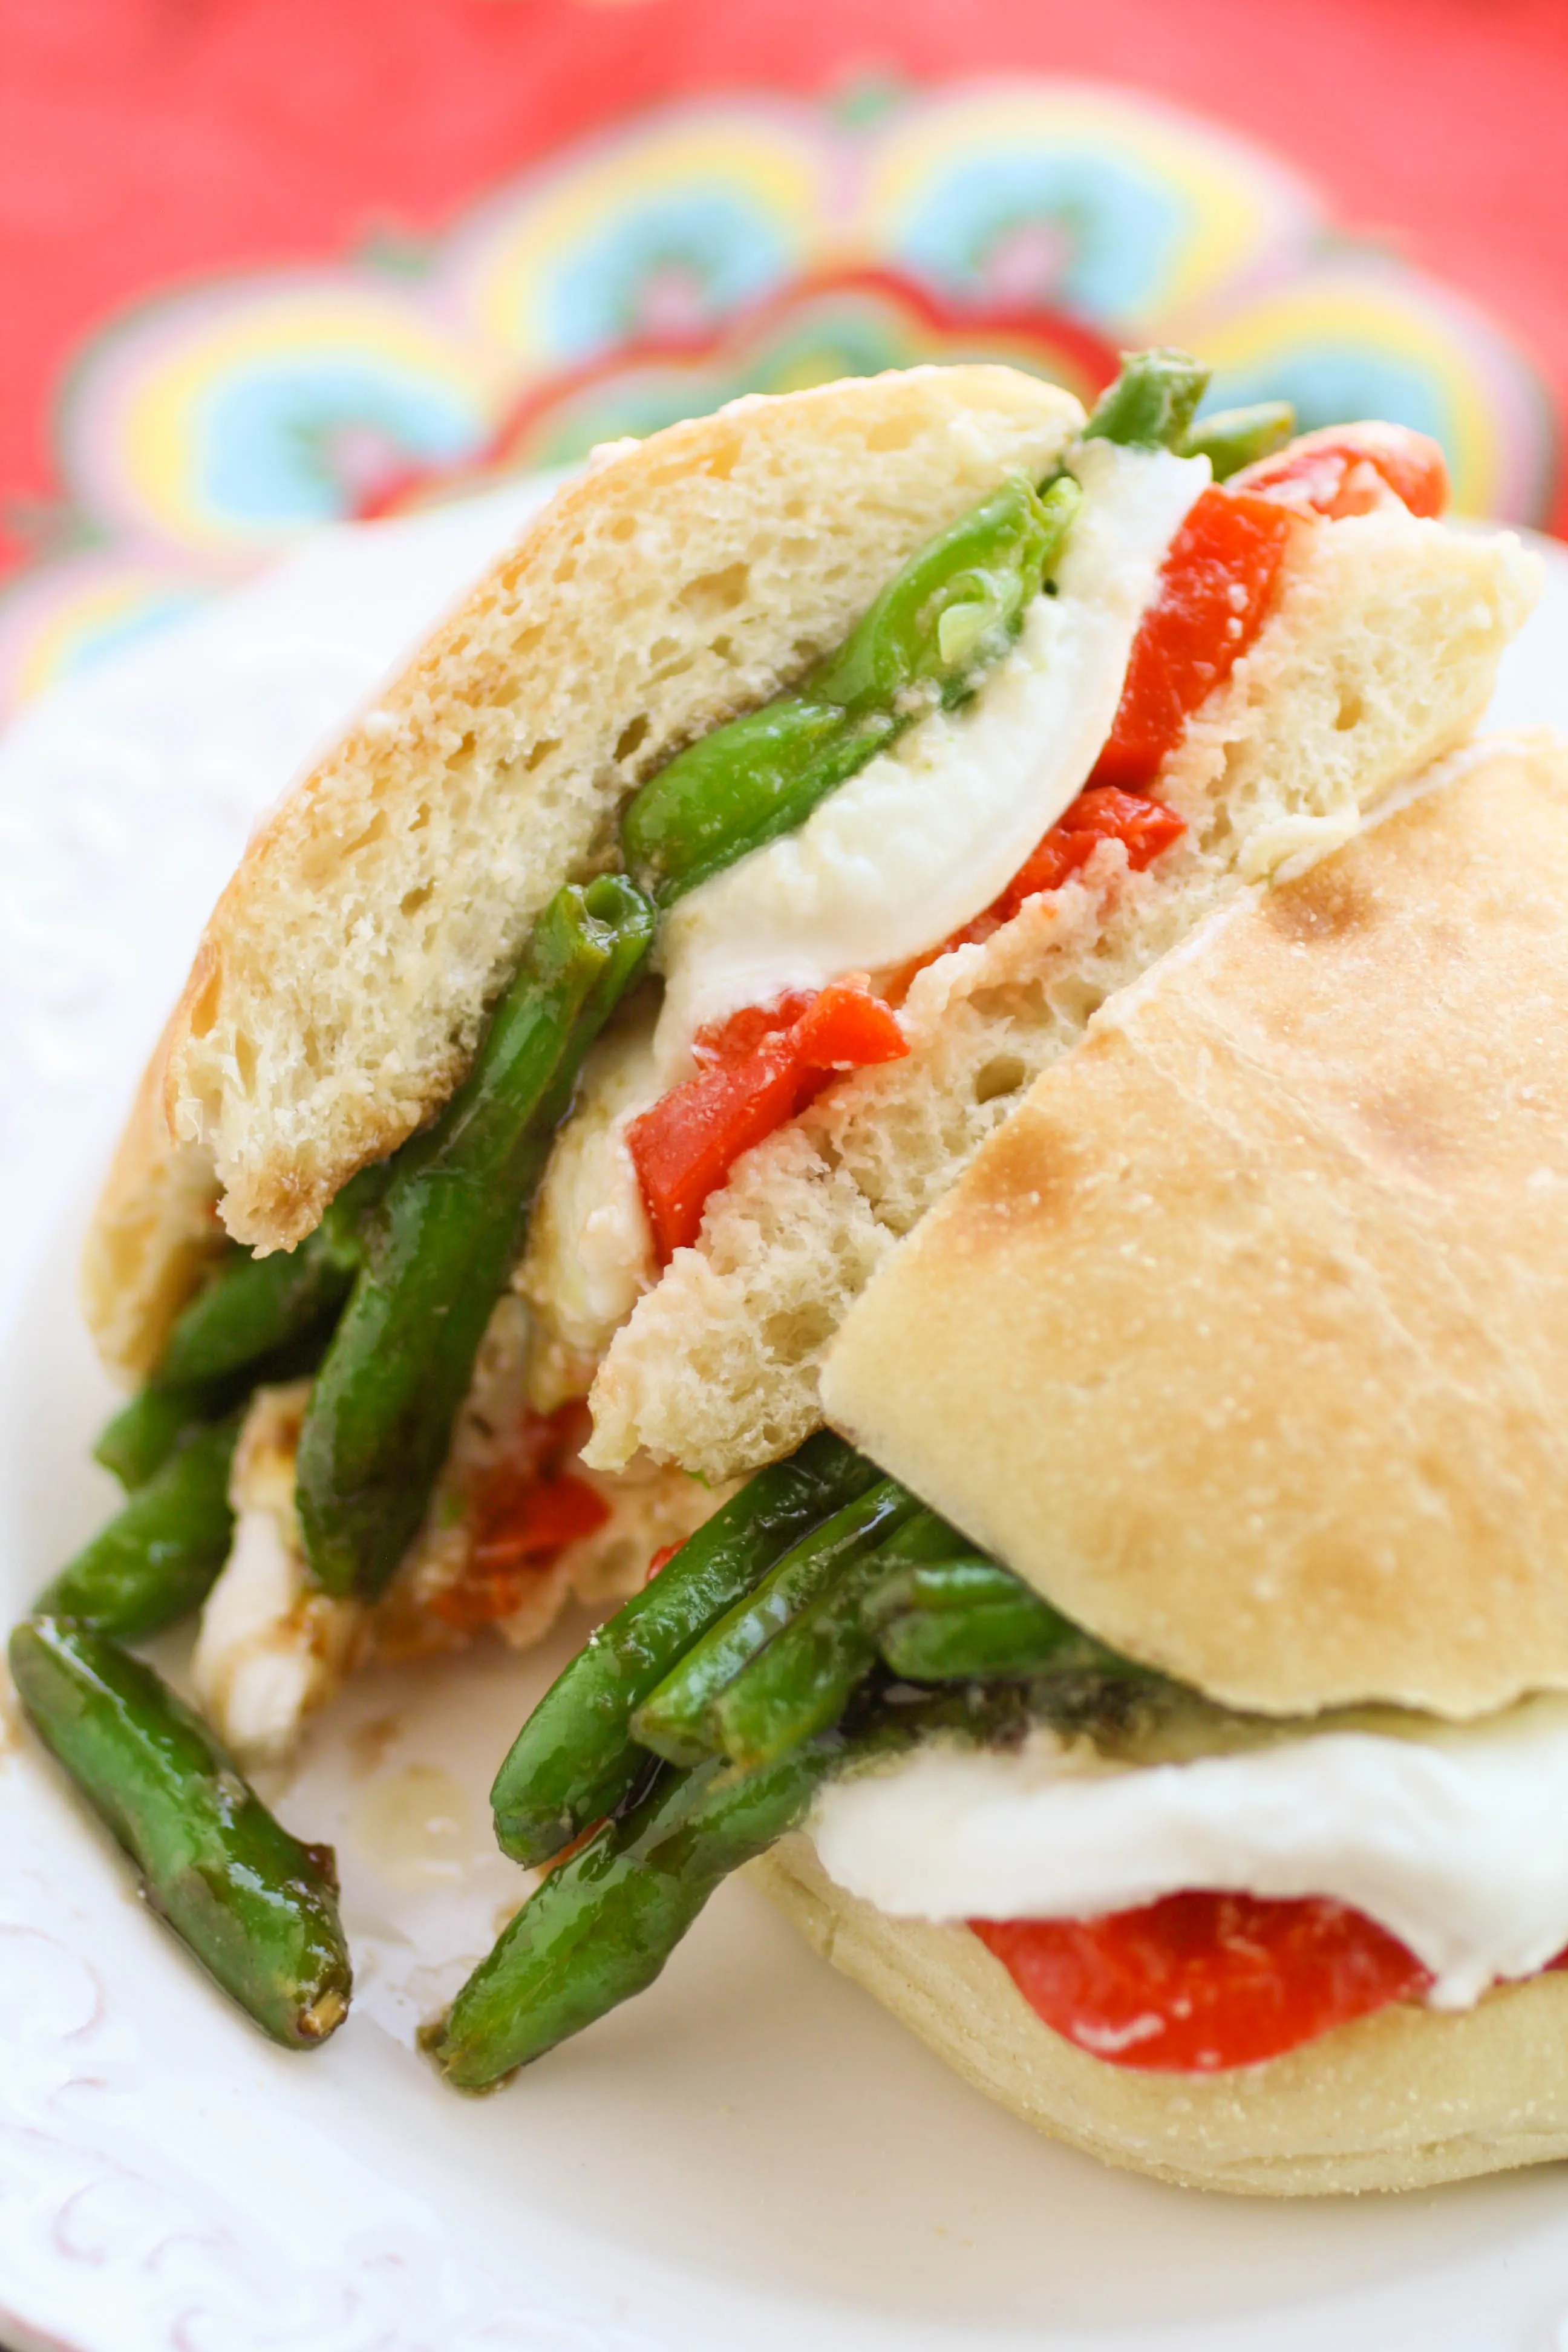 Balsamic Green Bean Sandwiches are fun to serve and quite a treat! Balsamic Green Bean Sandwiches are a lovely, unique sandwich!